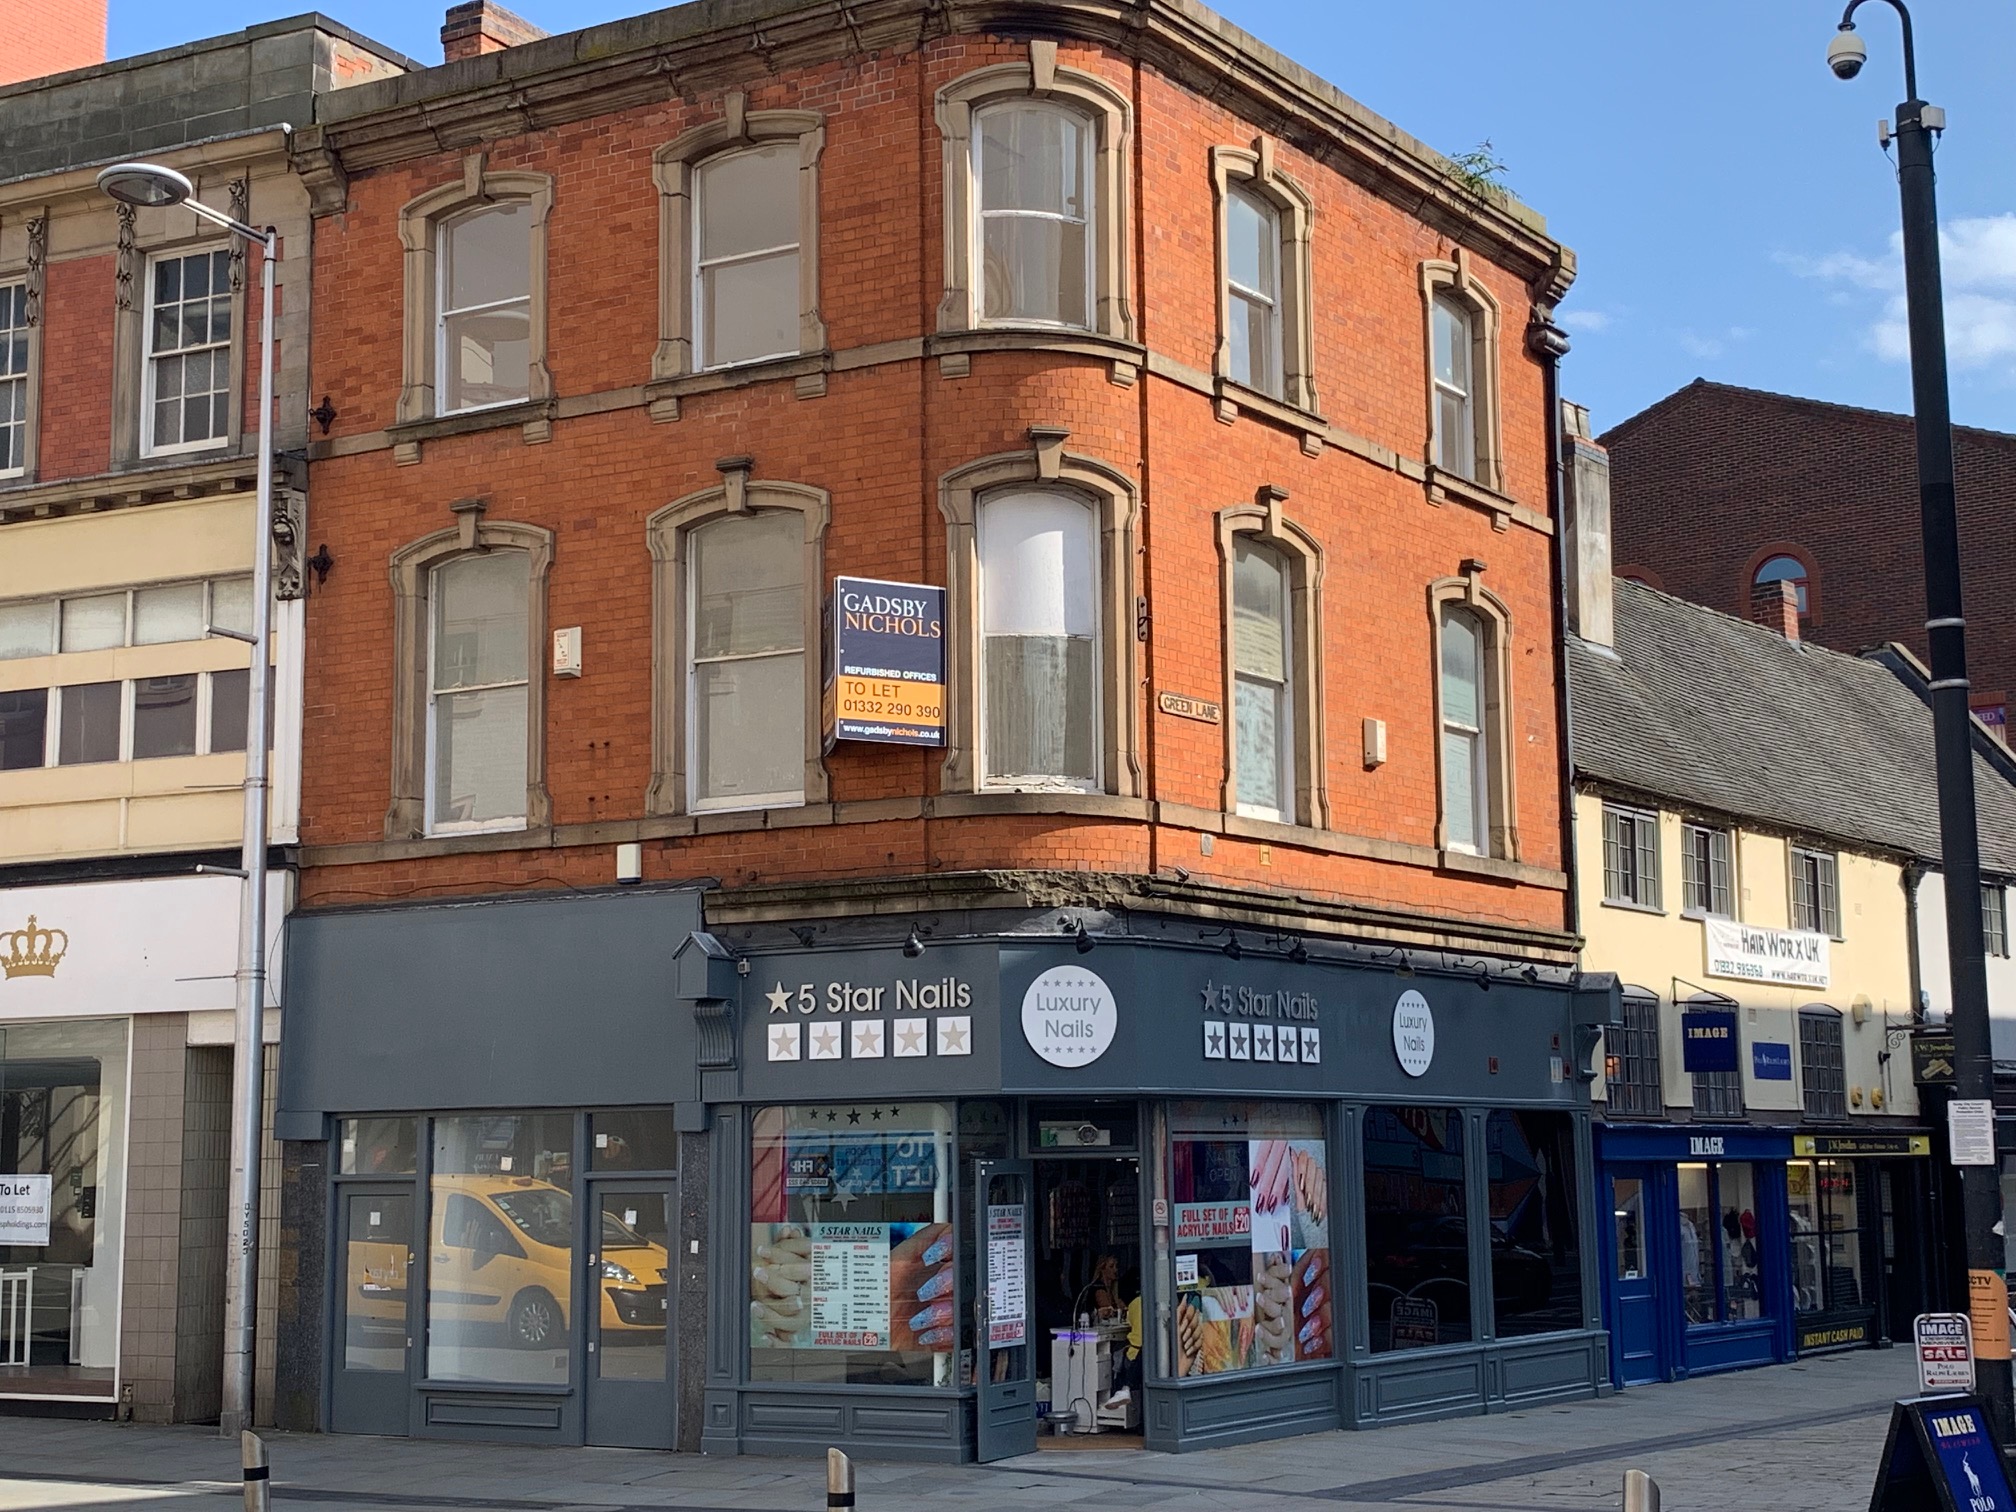 0 bed Retail Property (High Street) for rent in Derby. From Gadsby Nichols - Derby